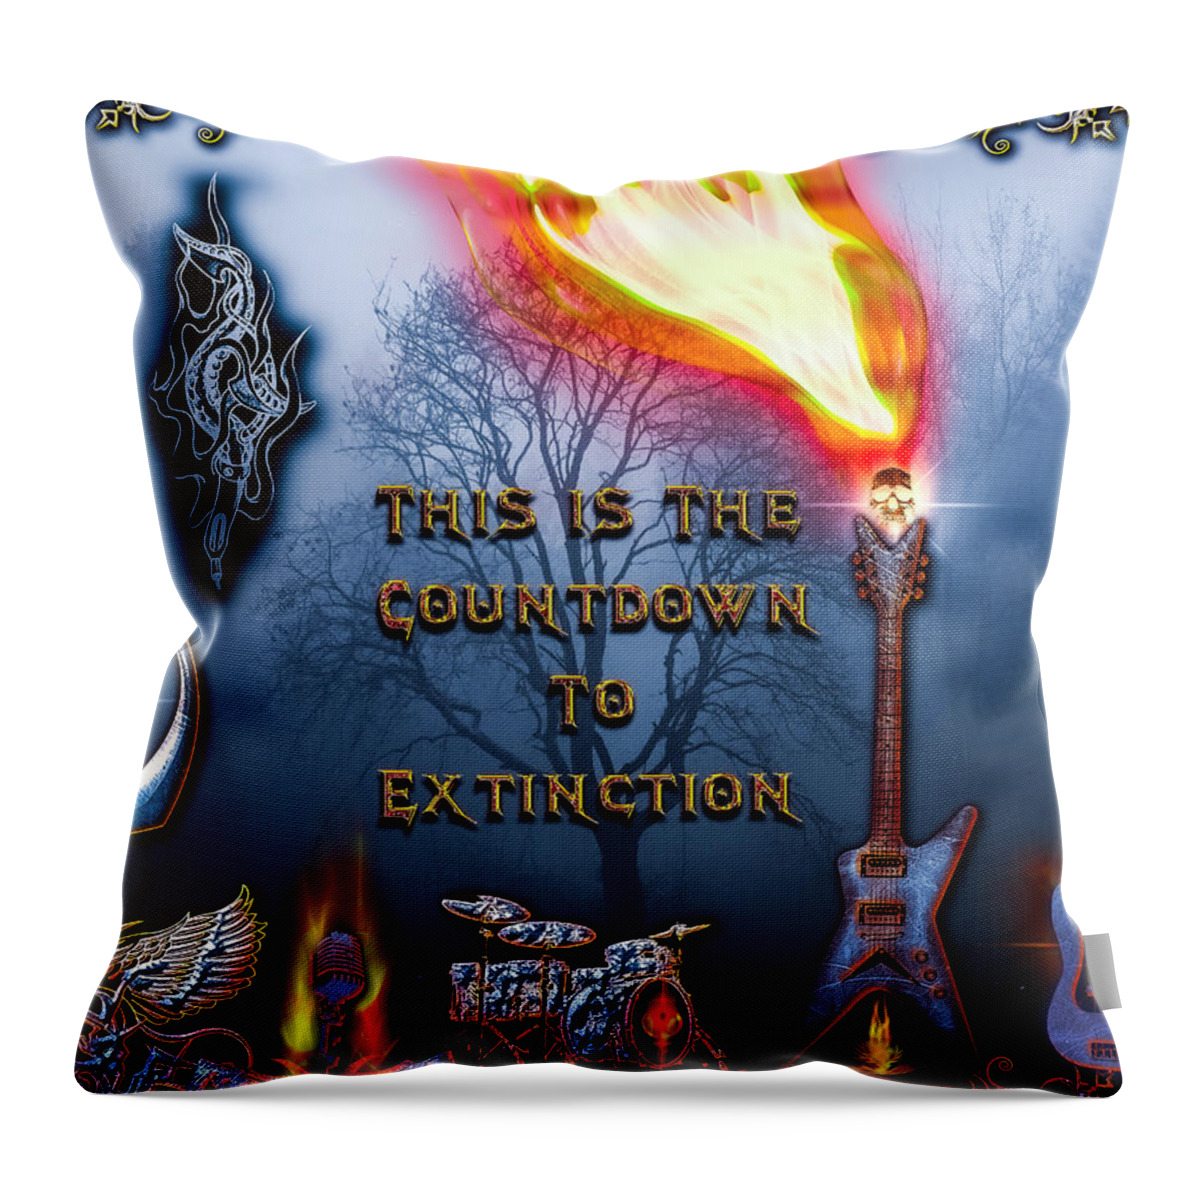 Hard Rock Music Throw Pillow featuring the digital art Countdown to Extinction by Michael Damiani